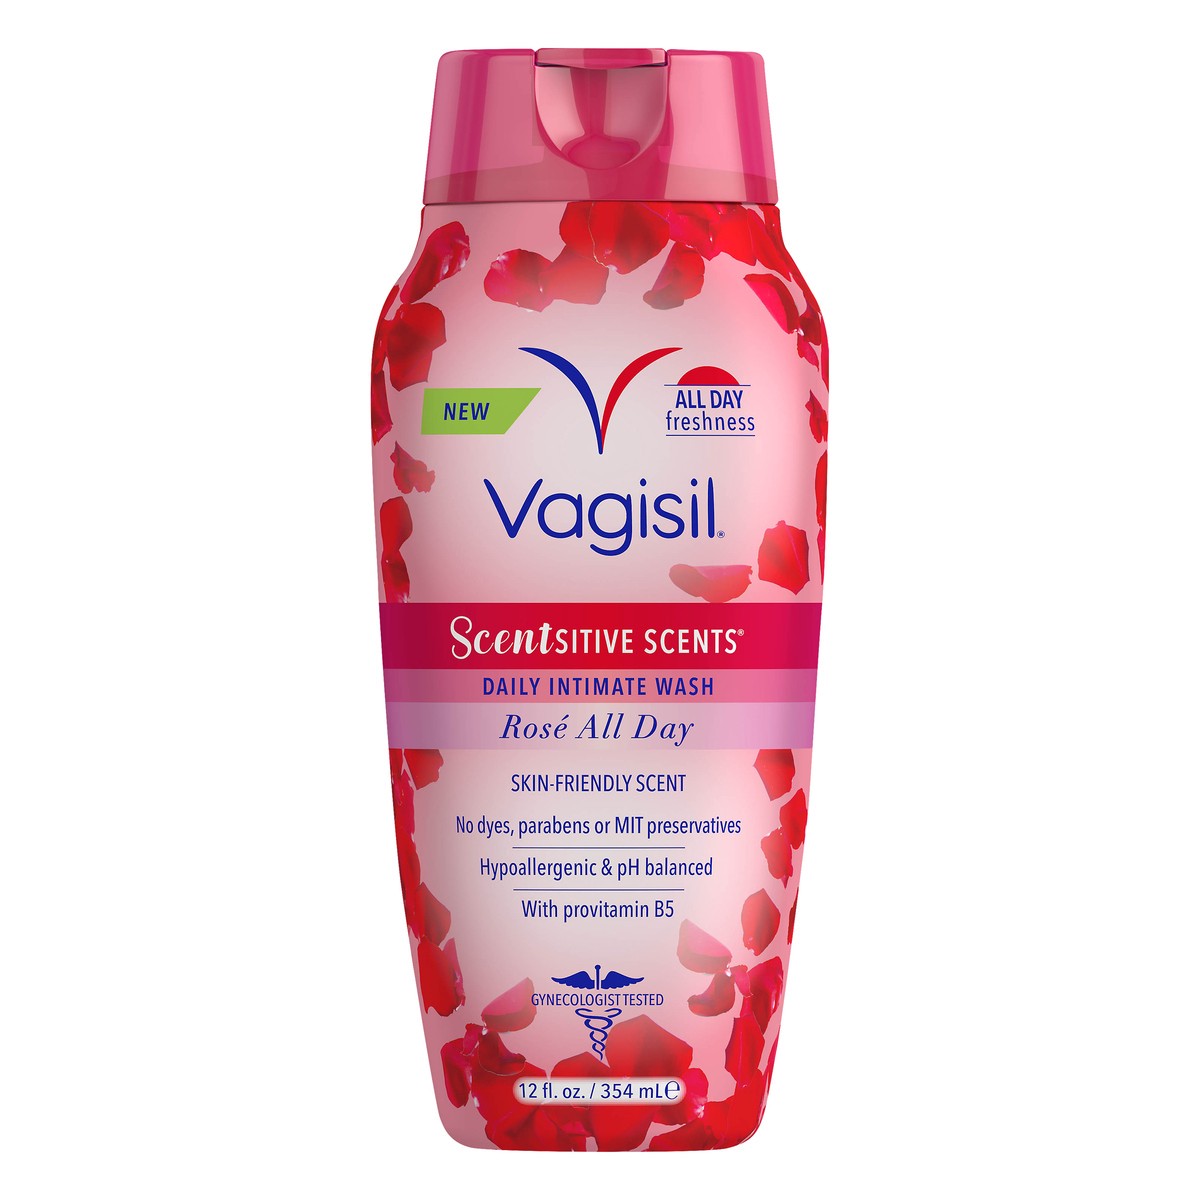 slide 8 of 8, Vagisil Scentsitive Scents Rose All Day Daily Intimate Wash 12 oz, 12 oz